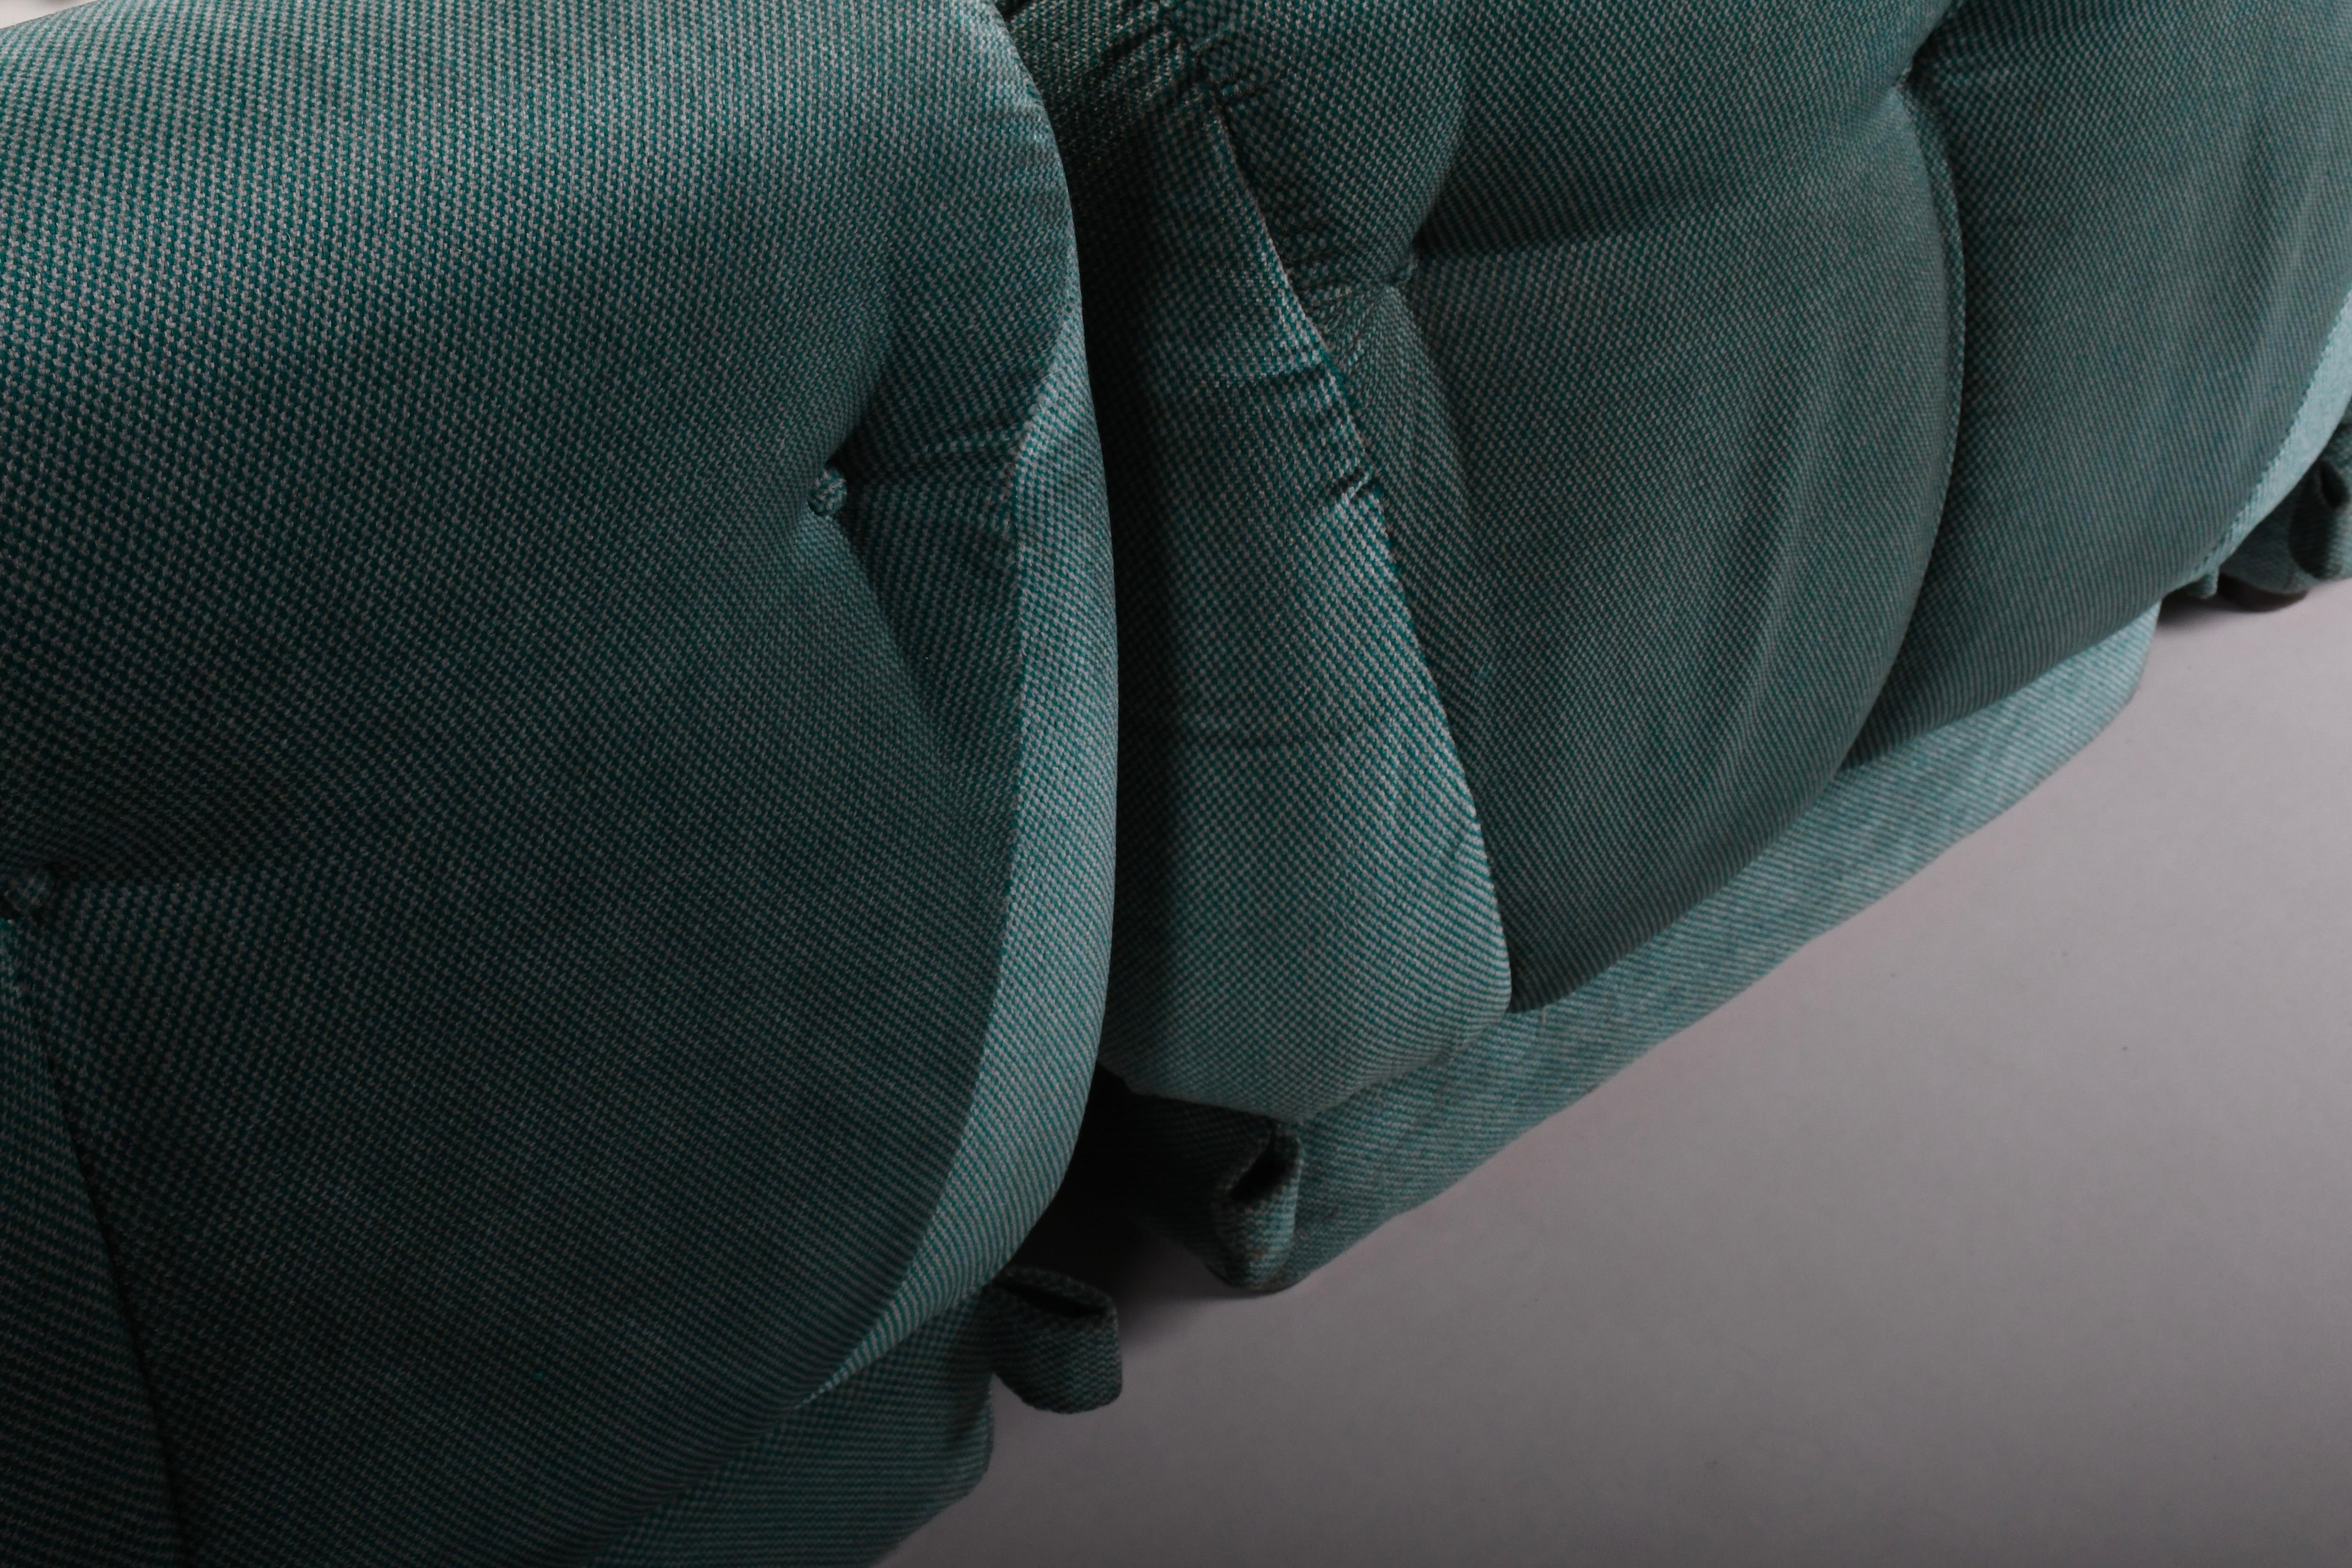 Large Modular Sectional ‘Nuvolone’ Sofa by Rino Maturi in Green Fabric, 1970s For Sale 4